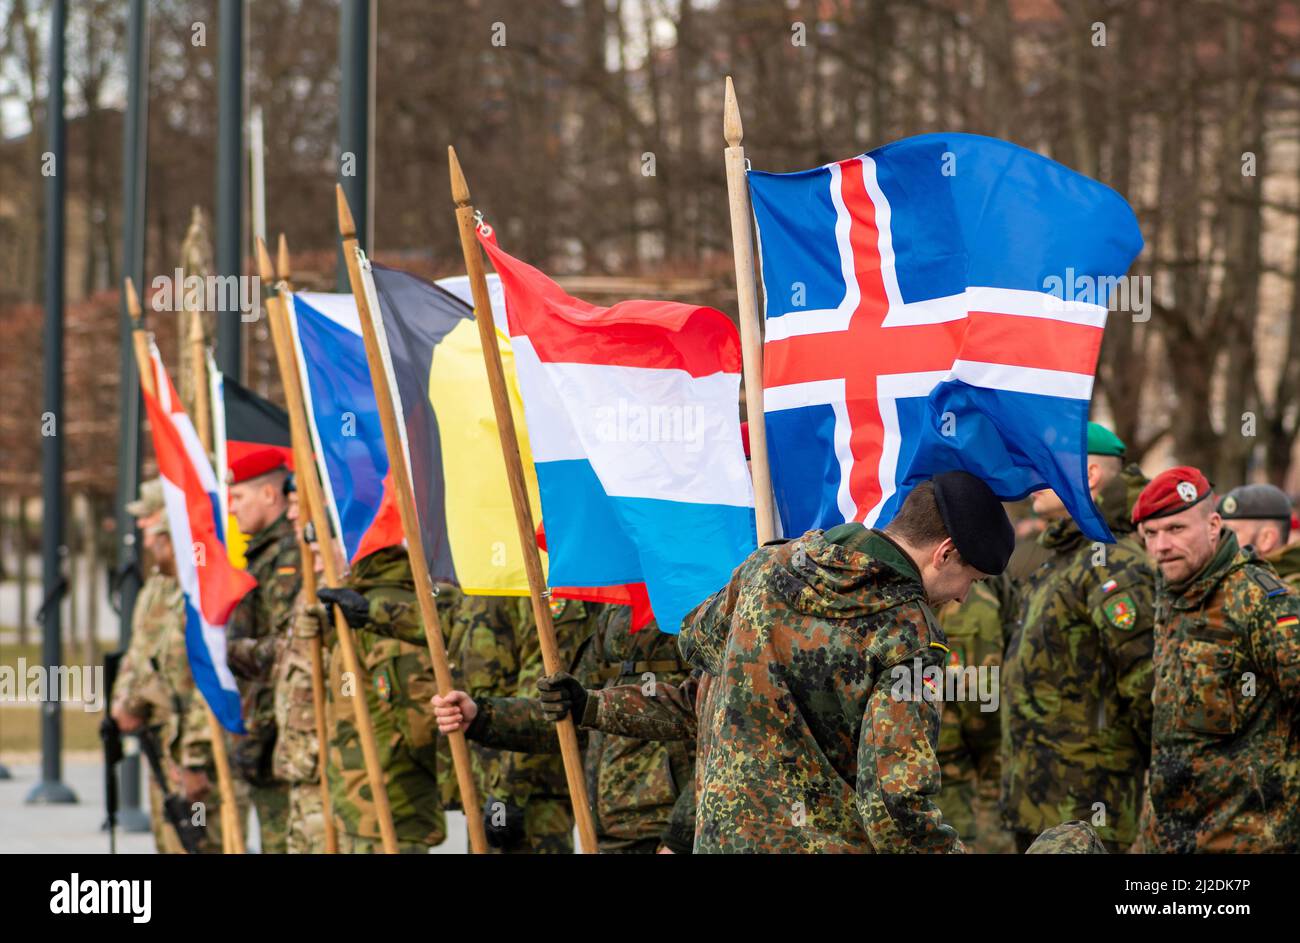 Vilnius, Lithuania - March 29 2022: Flags of various European countries members of NATO force integration unit, close up Stock Photo